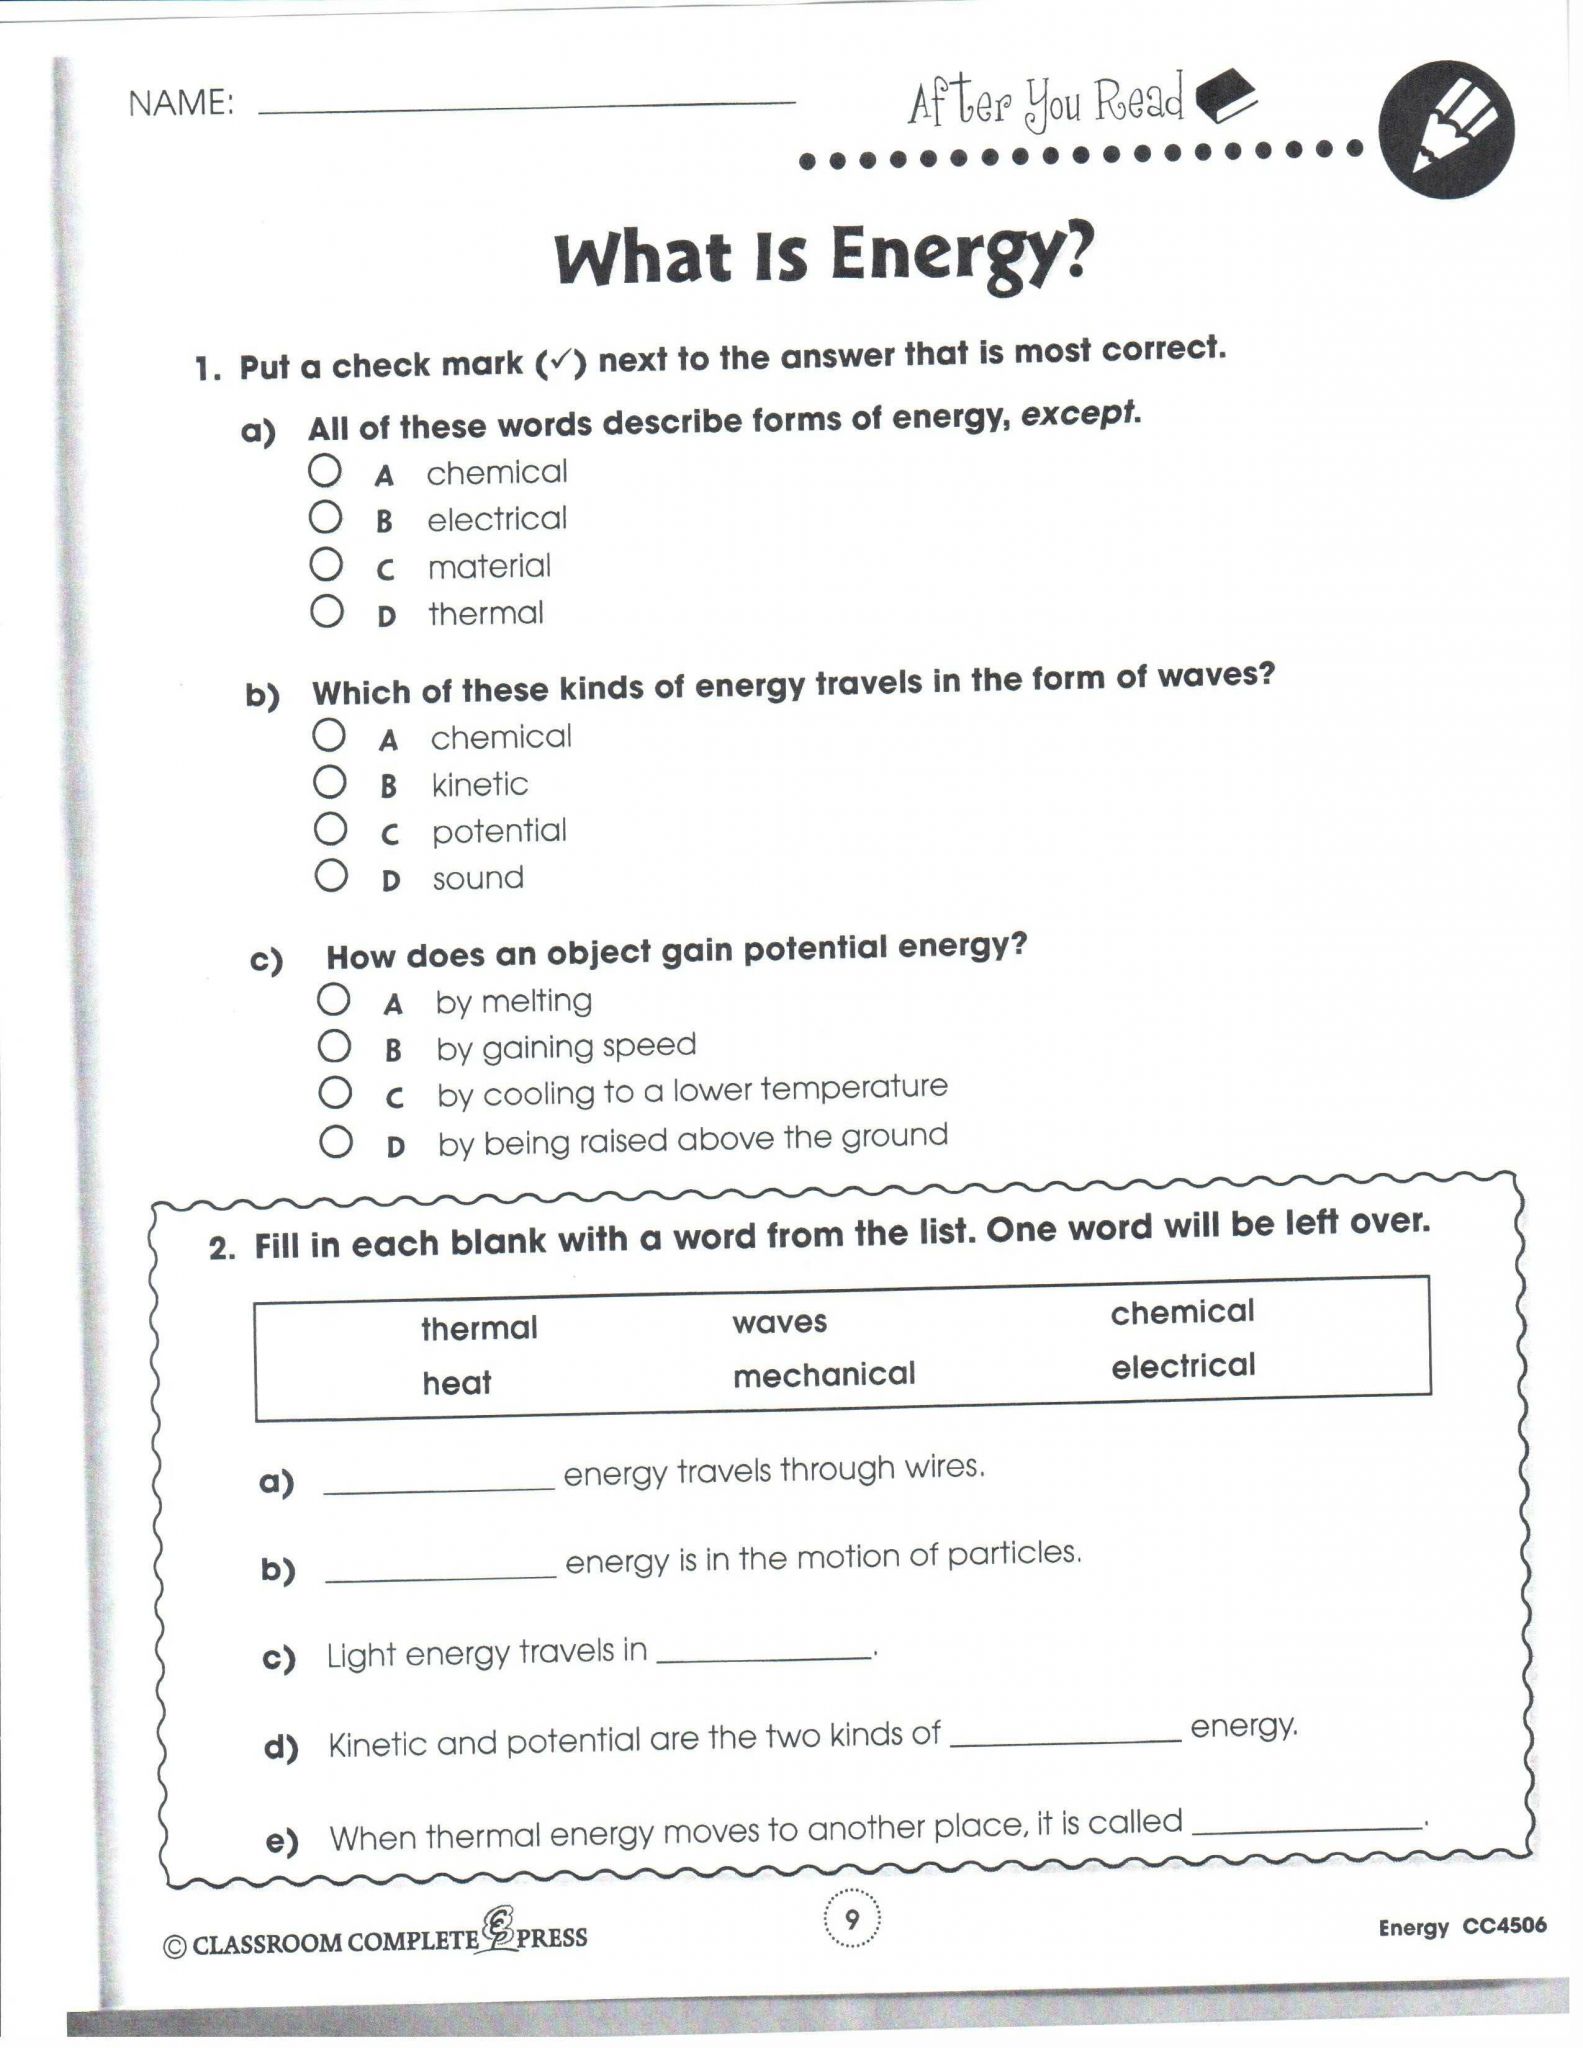 Rise Of islam Worksheet Also Relative Humidity Practice Problems Worksheet Answers Best Cisco